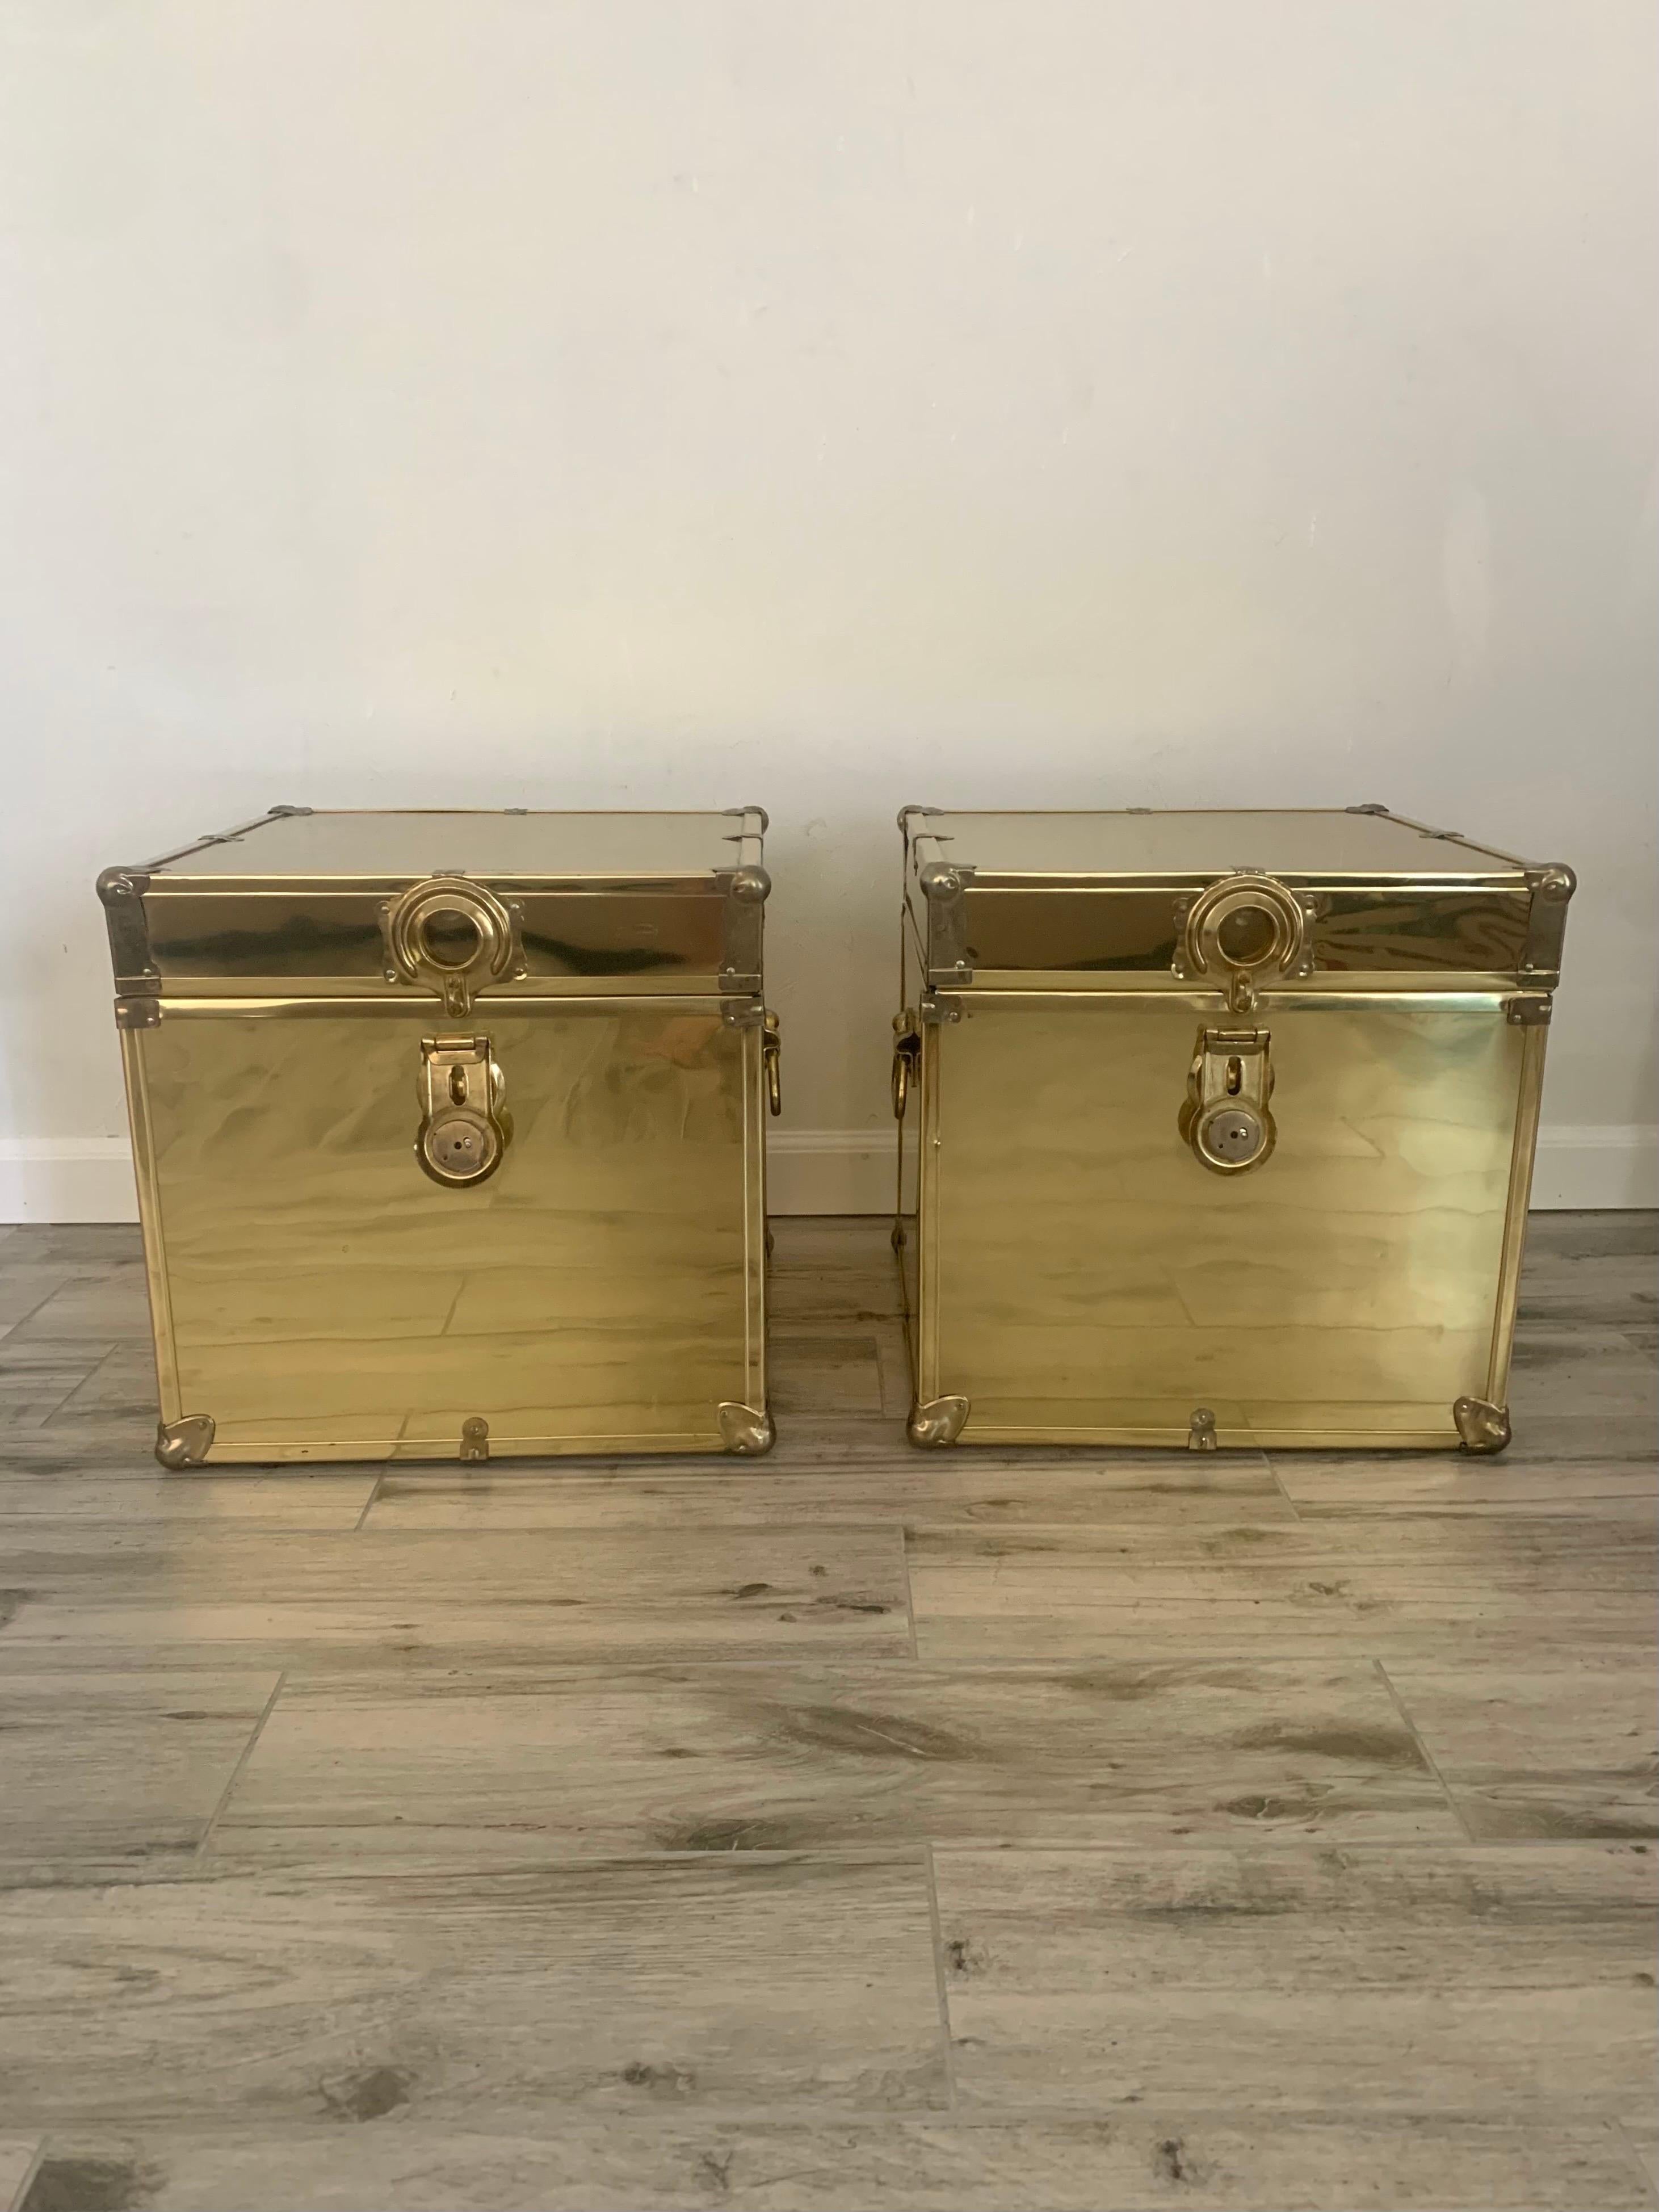 A pair of decorative brass trunks. In the style of Sarreid. Mid 20th century production. Latches to lock them if desired. Would make great end tables or decorative storage in any room. 

Both boxes are lidded with a hinge and have two handles on